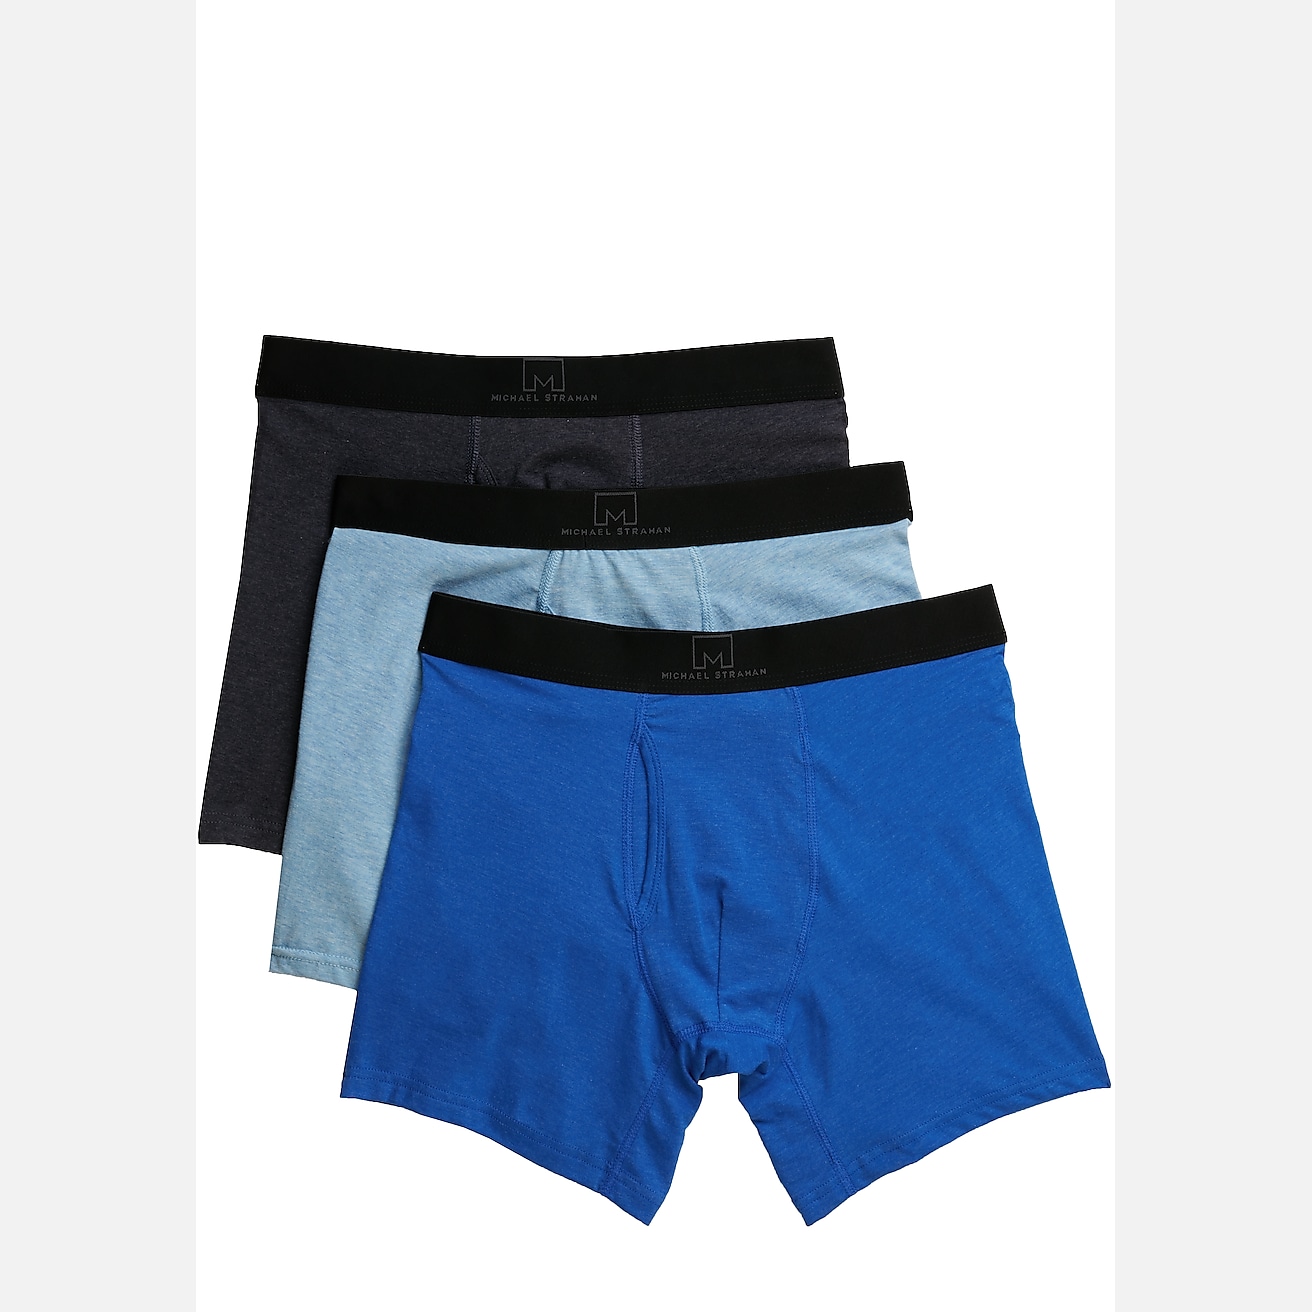 MSX By Michael Strahan Boxer Briefs 3-Pack, All Sale